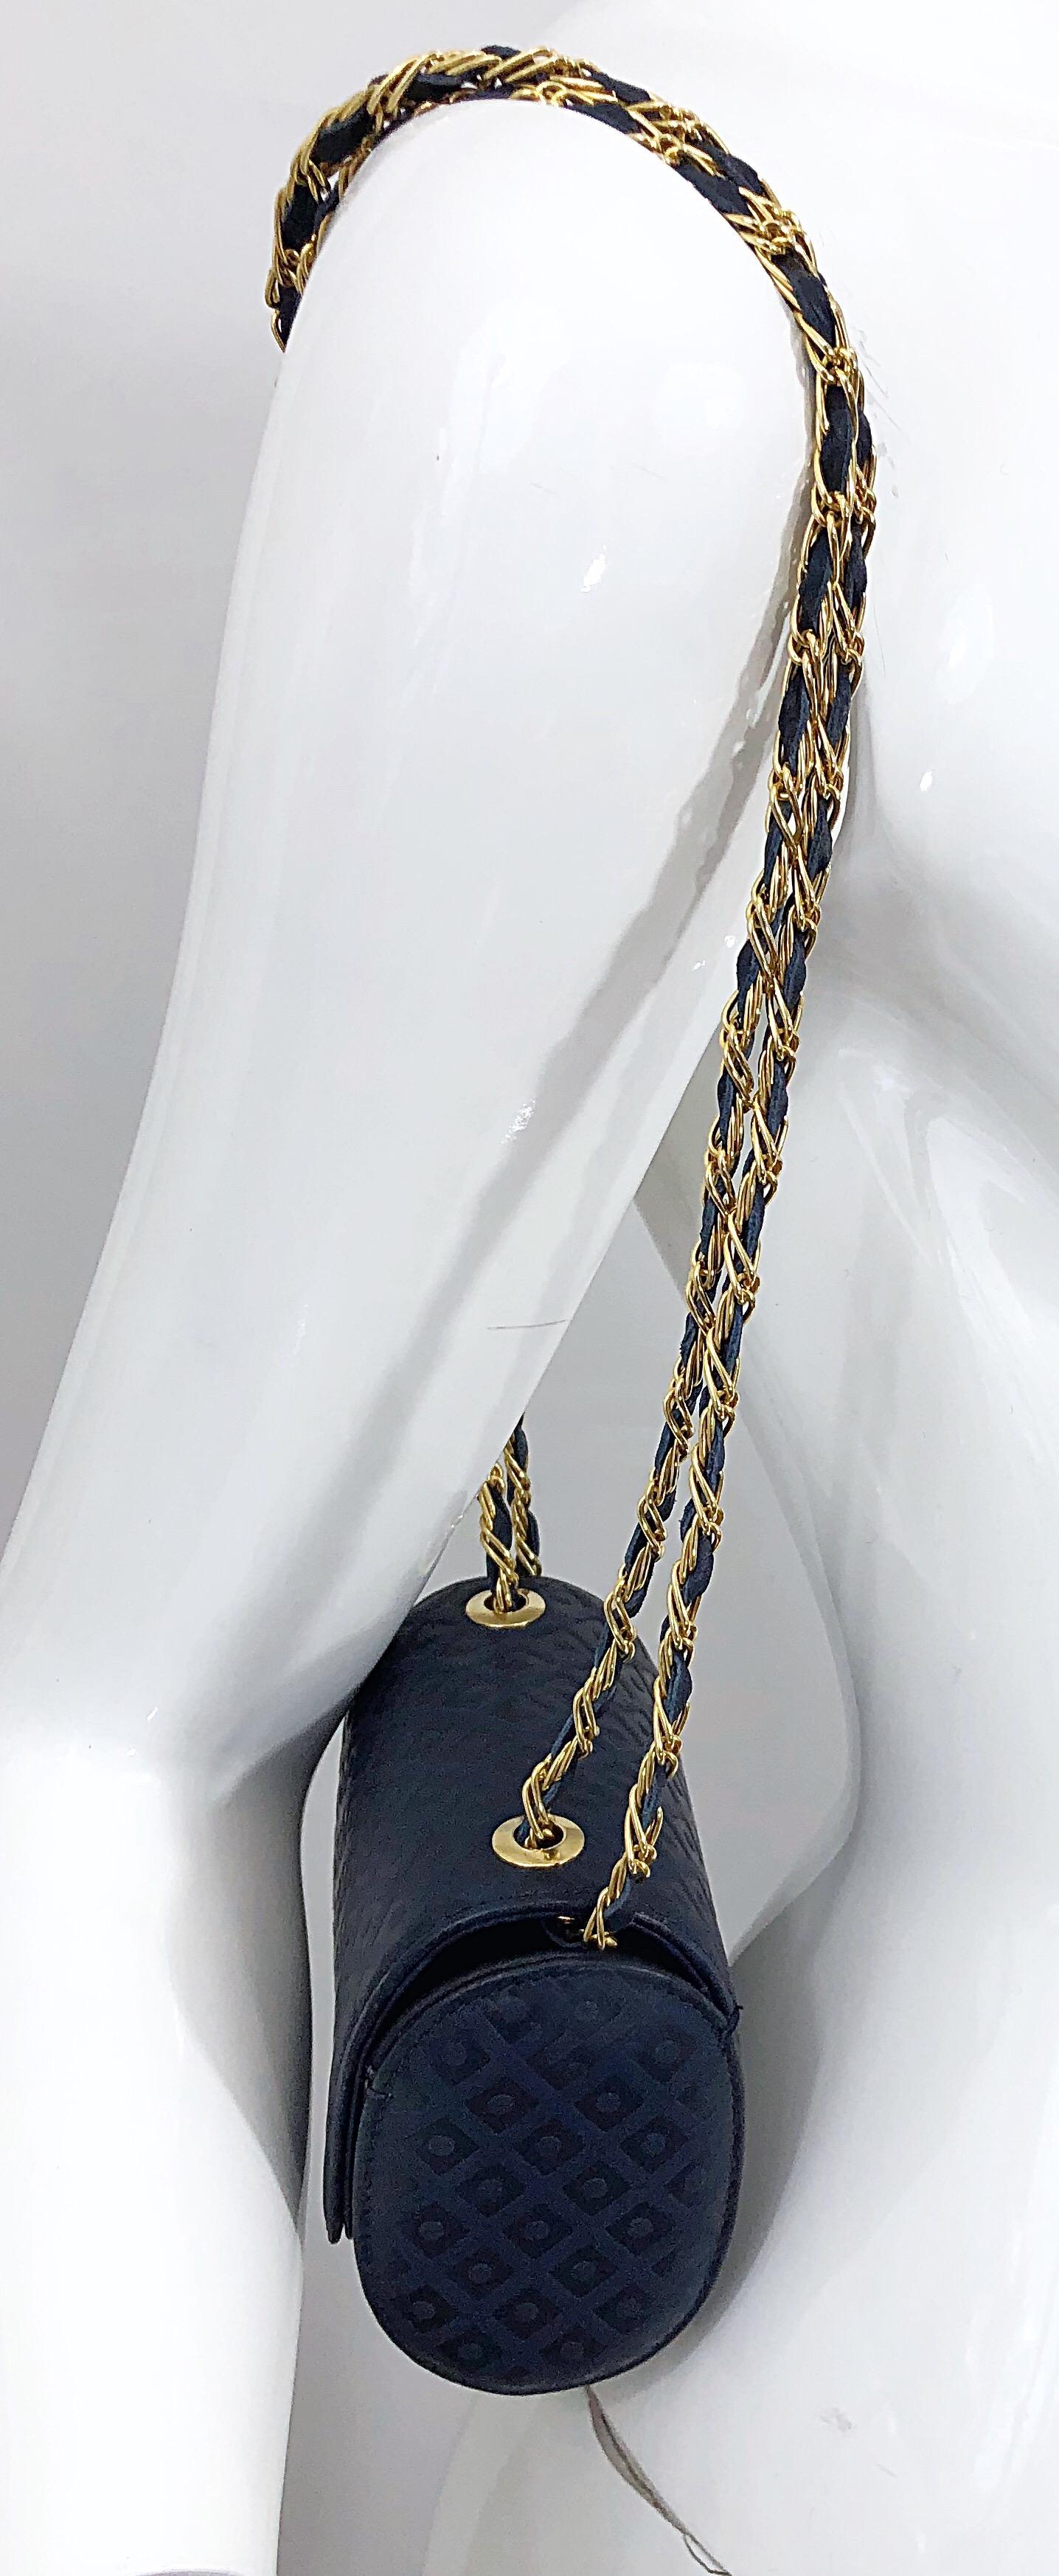 Chic LUC BENOIT navy blue leather embossed leather small cross body bag / handbag! Features a gold metal chain intertwined with matching navy blue leather. Snap closure keeps everything safe. Strap can be doubled up to wear on the shoulder or long